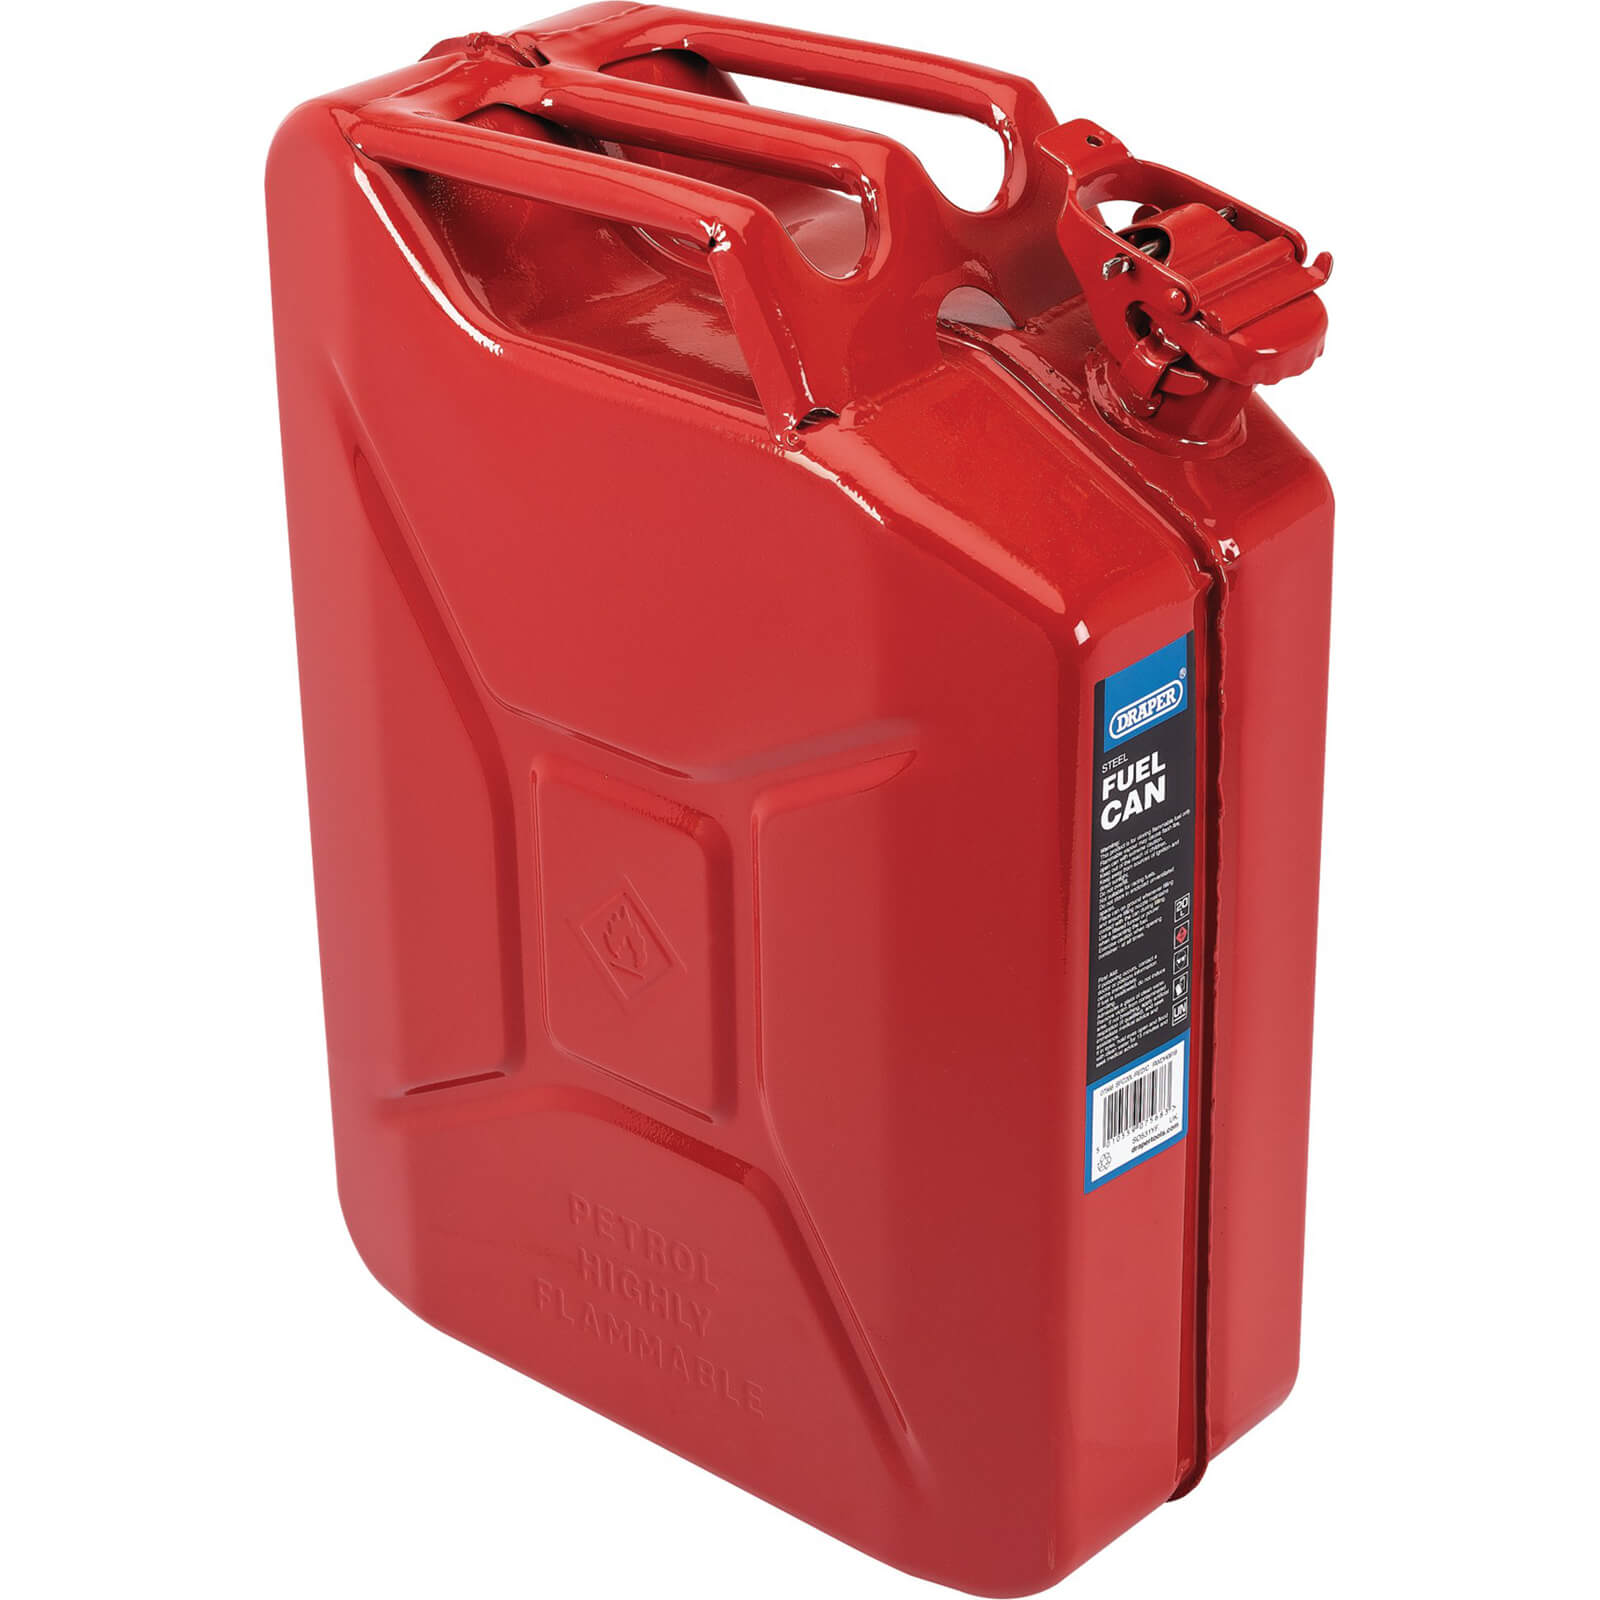 Image of Draper Steel Jerry Can 20l Red